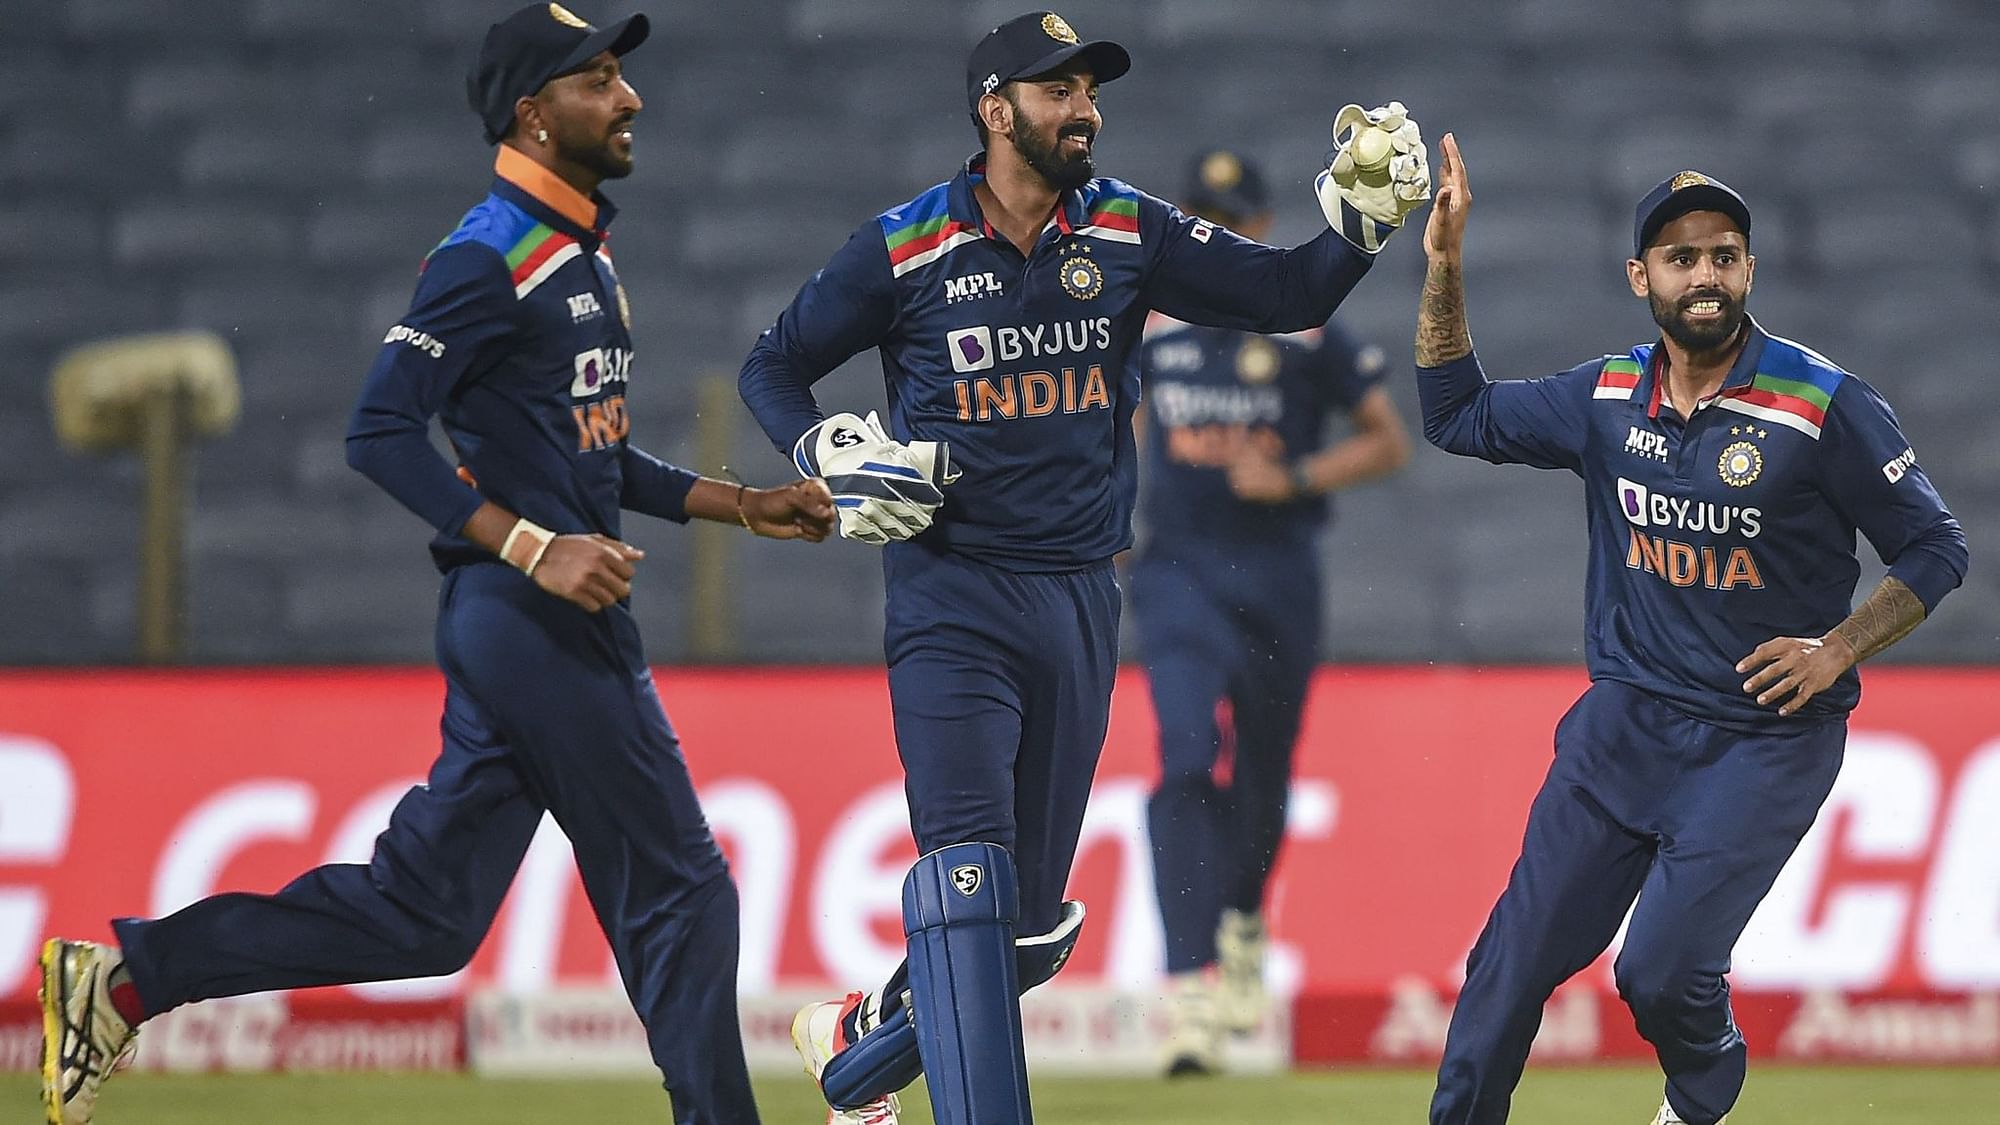 Pune: Indian cricketer Krunal Pandya, KL Rahul and Suryakumar Yadav celebrates the wicket of England cricketer Moeen Ali during the first One Day International cricket match between India and England.